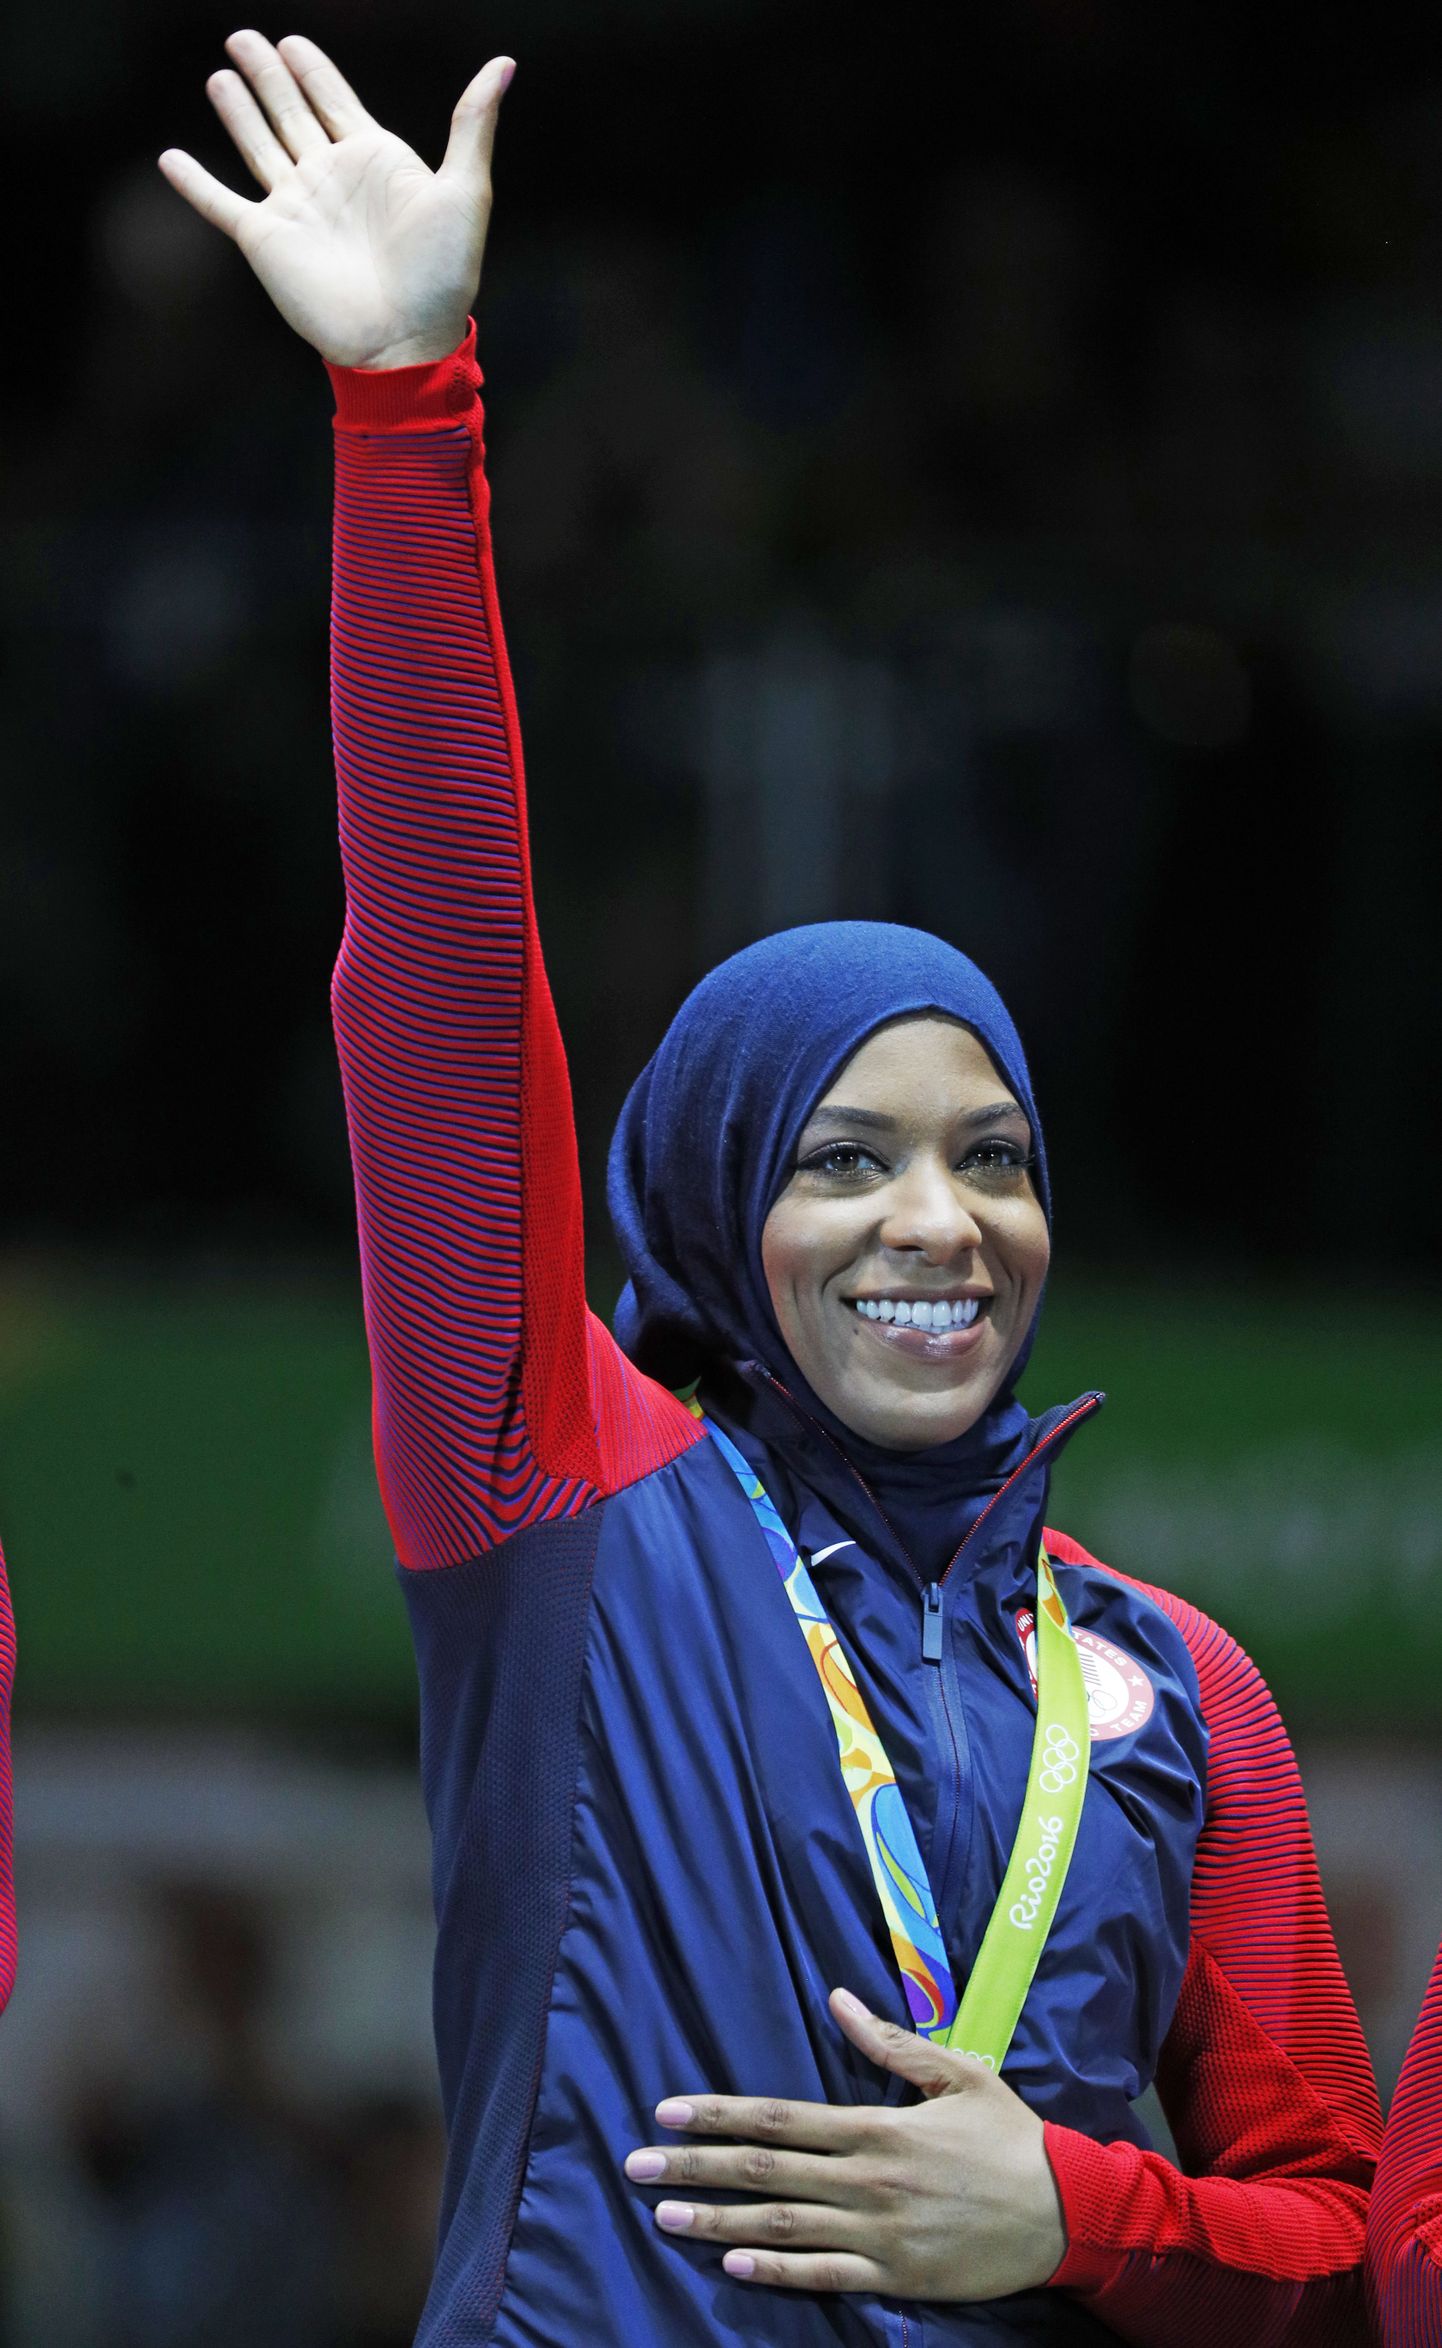 Ibtihaj Muhammad of the United States pose with her bronze medals on the podium after the womens team sabre fencing event at the 2016 Summer Olympics in Rio de Janeiro, Brazil, Saturday, Aug. 13, 2016. (AP Photo/Vincent Thian)